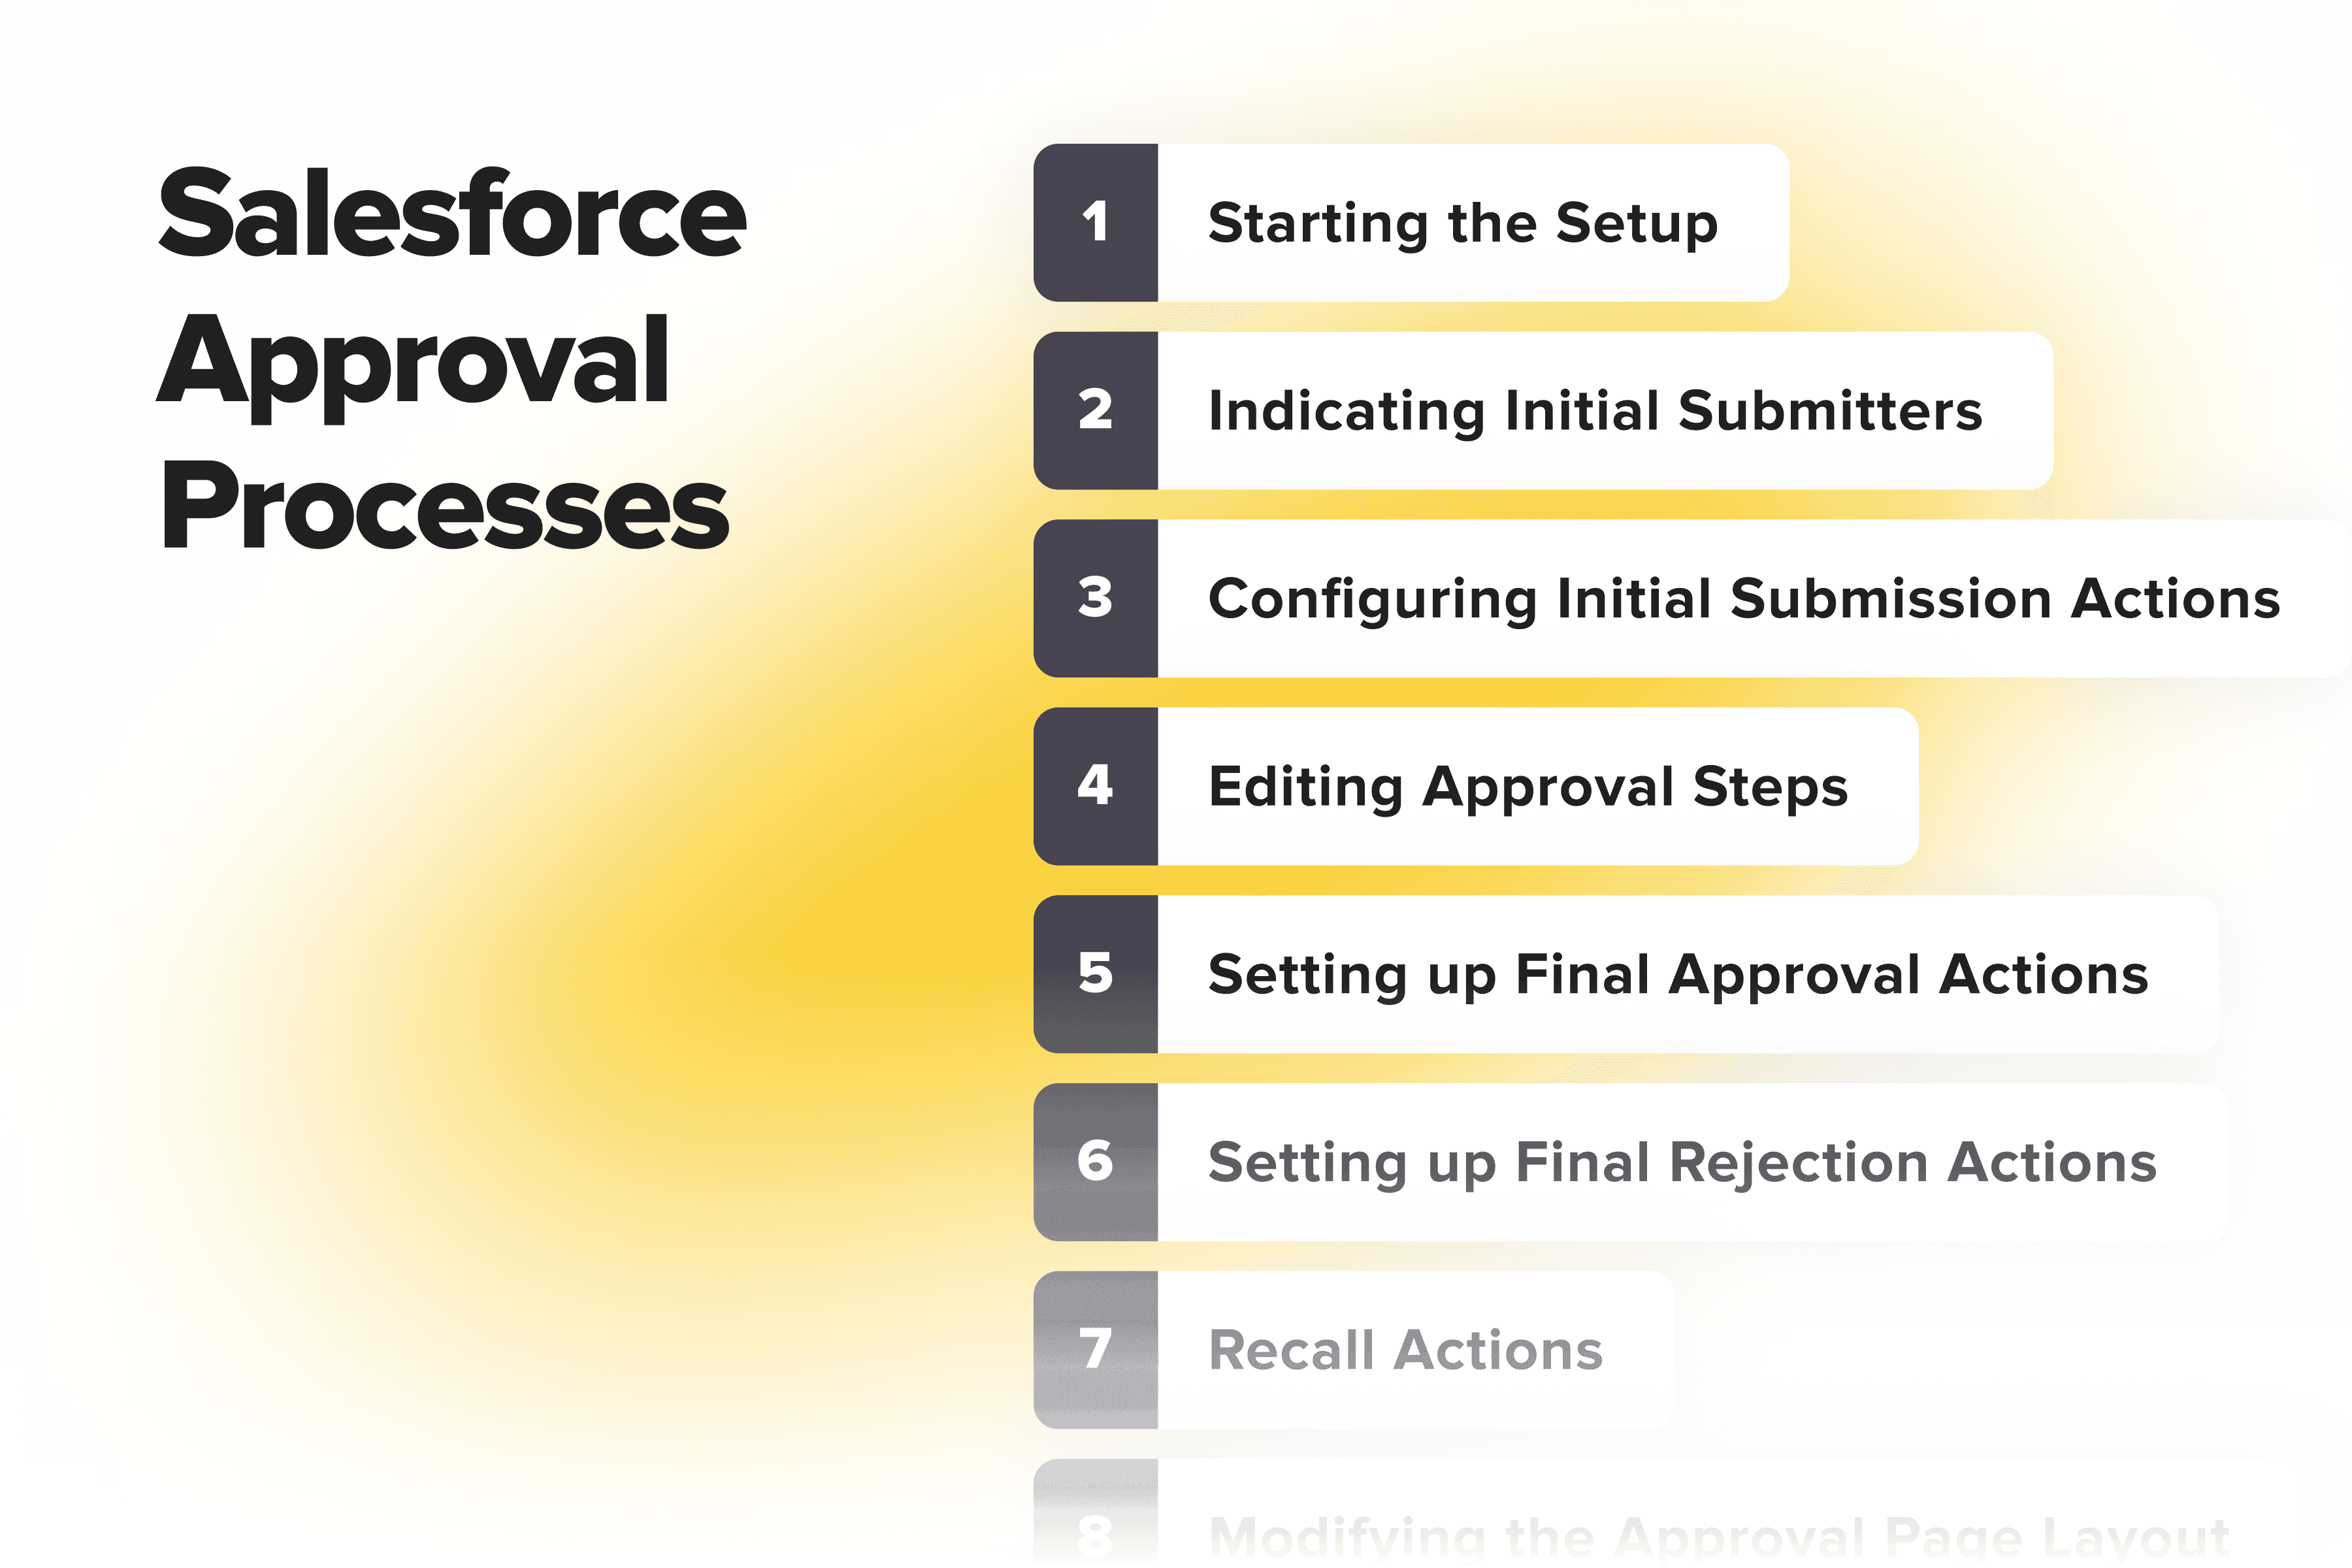 Salesforce Approval Processes